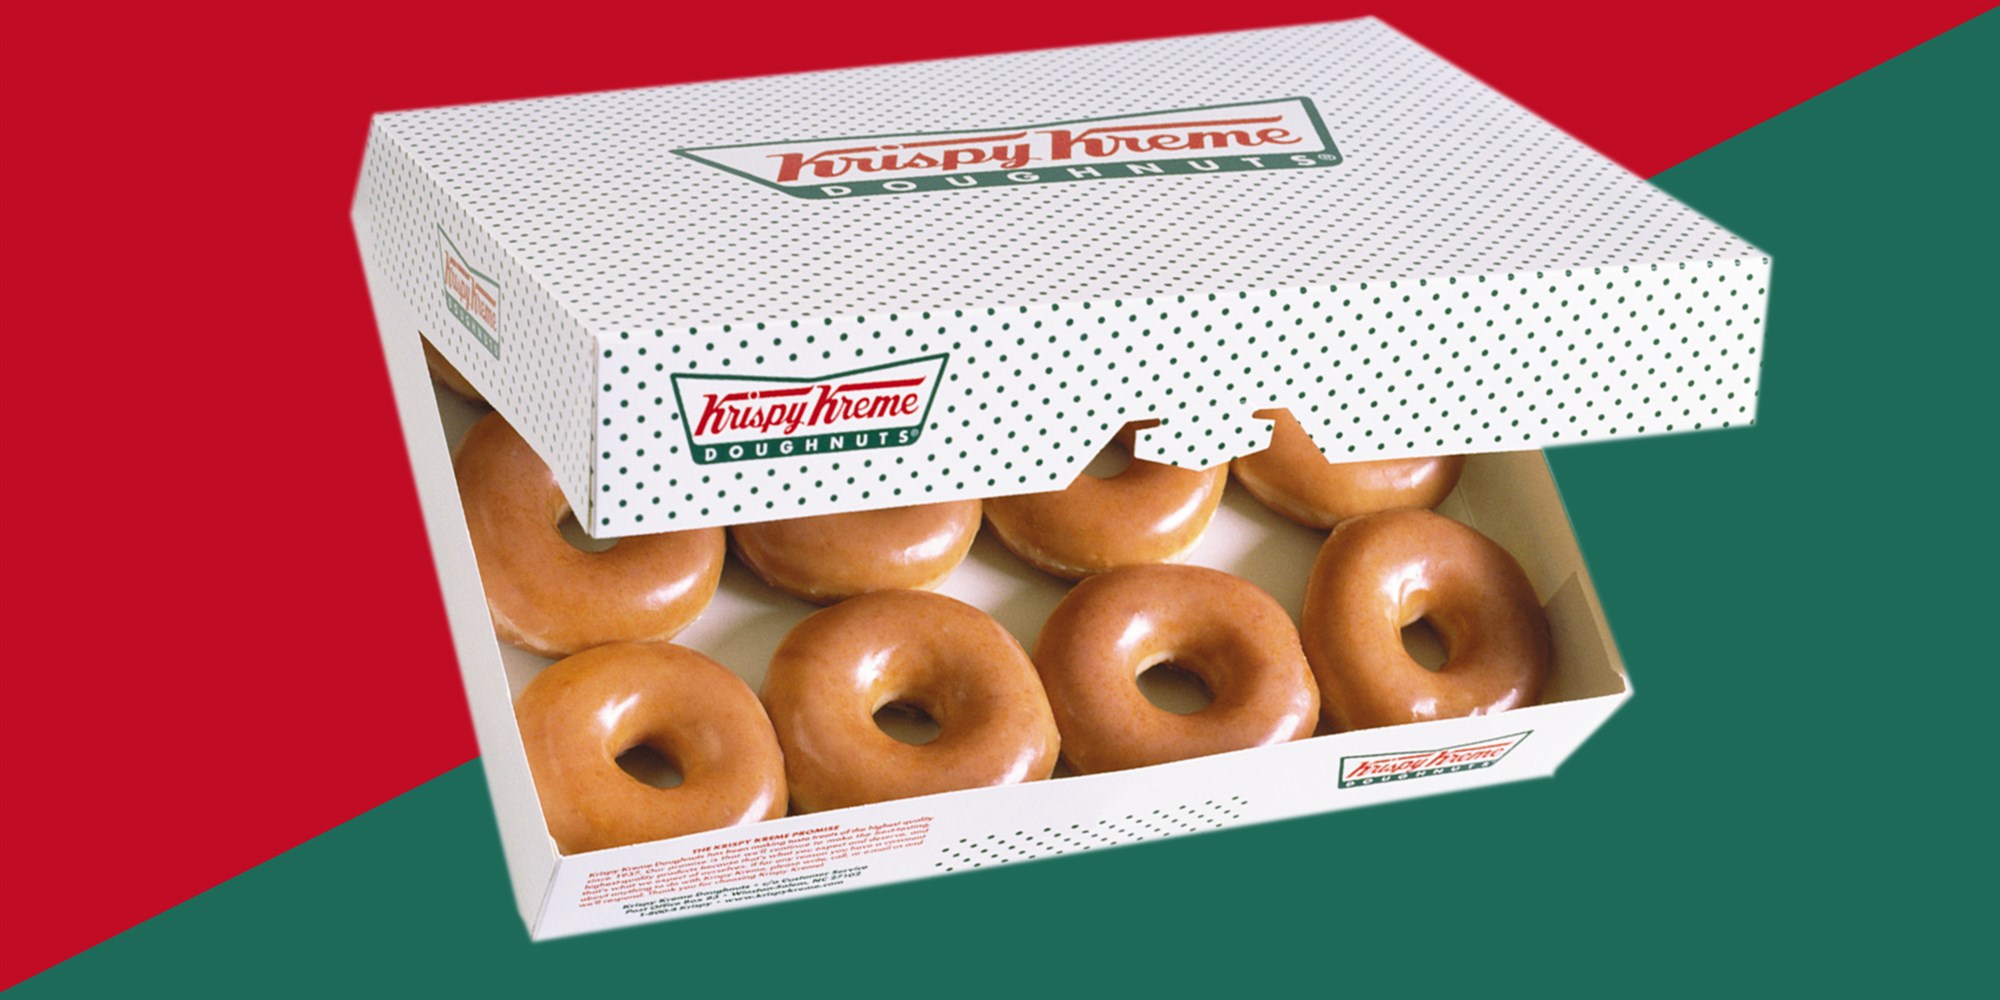 The krispy kreme doughnuts logo was designed by benny dinkins, a local nort...